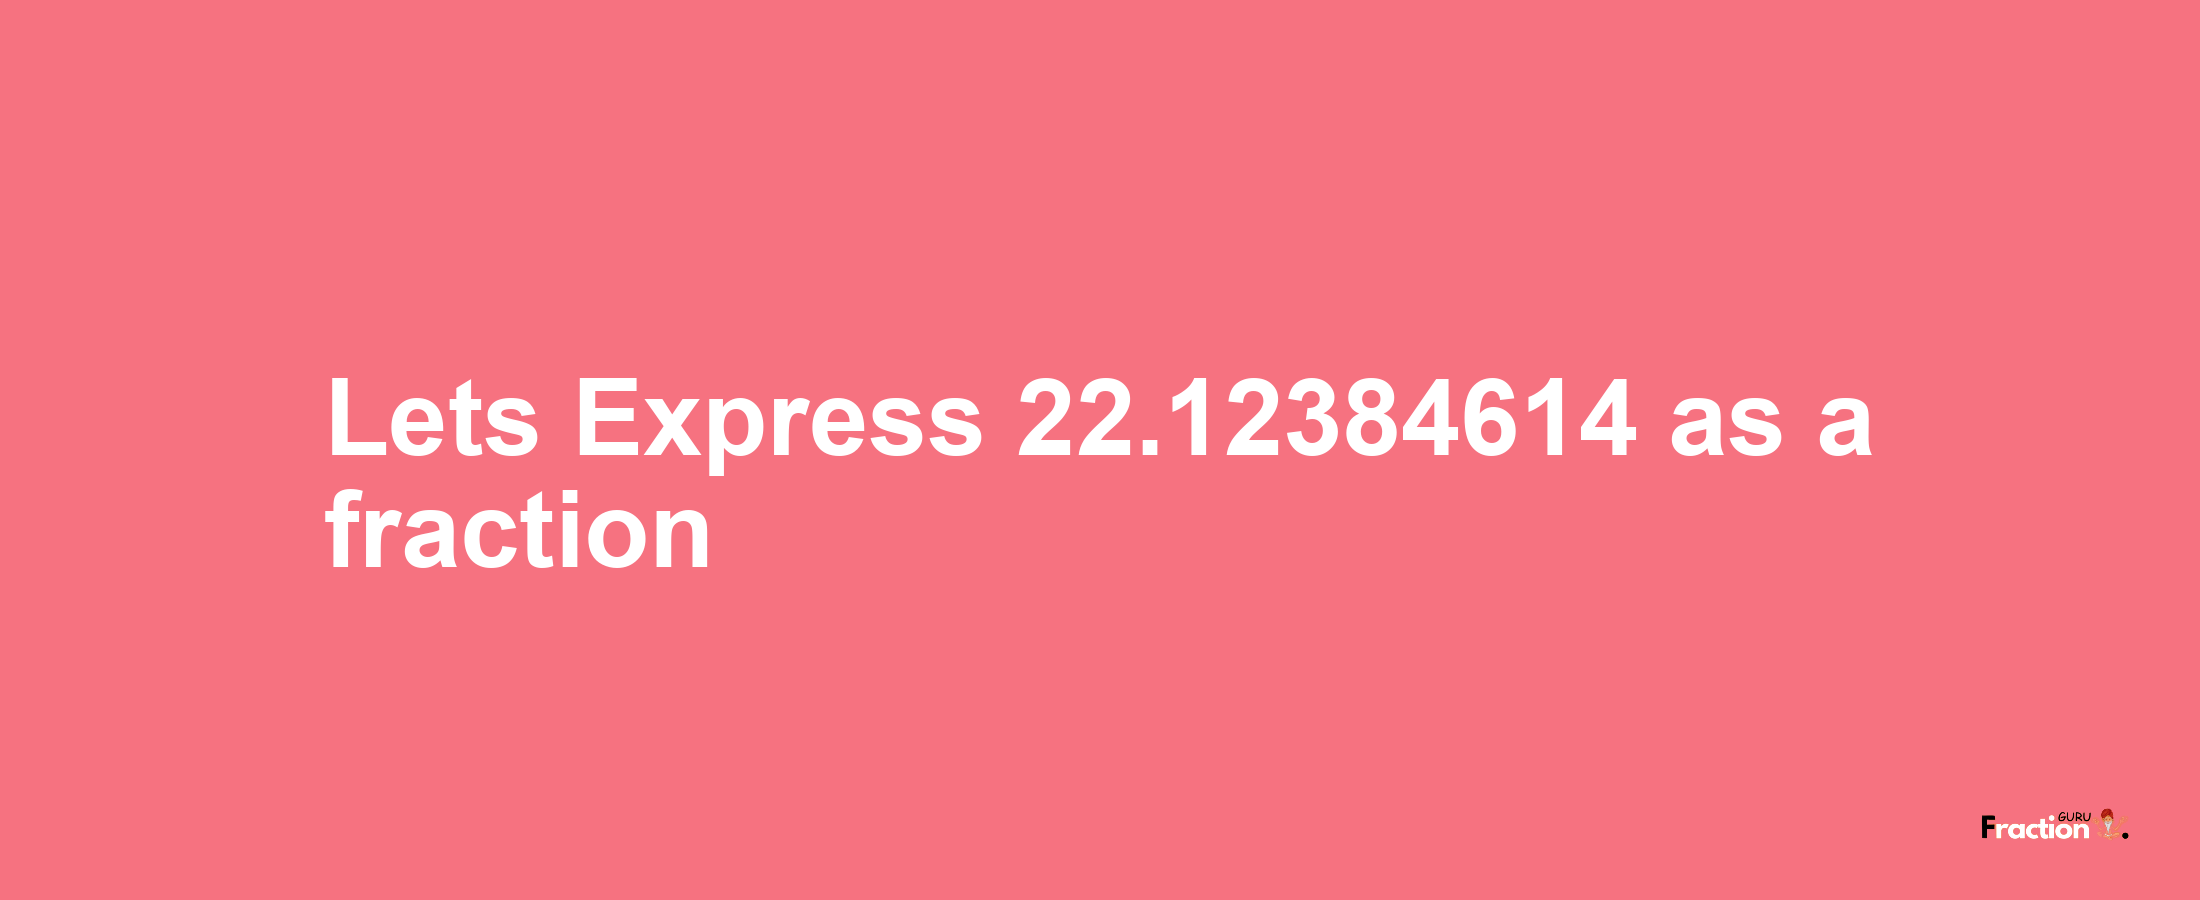 Lets Express 22.12384614 as afraction